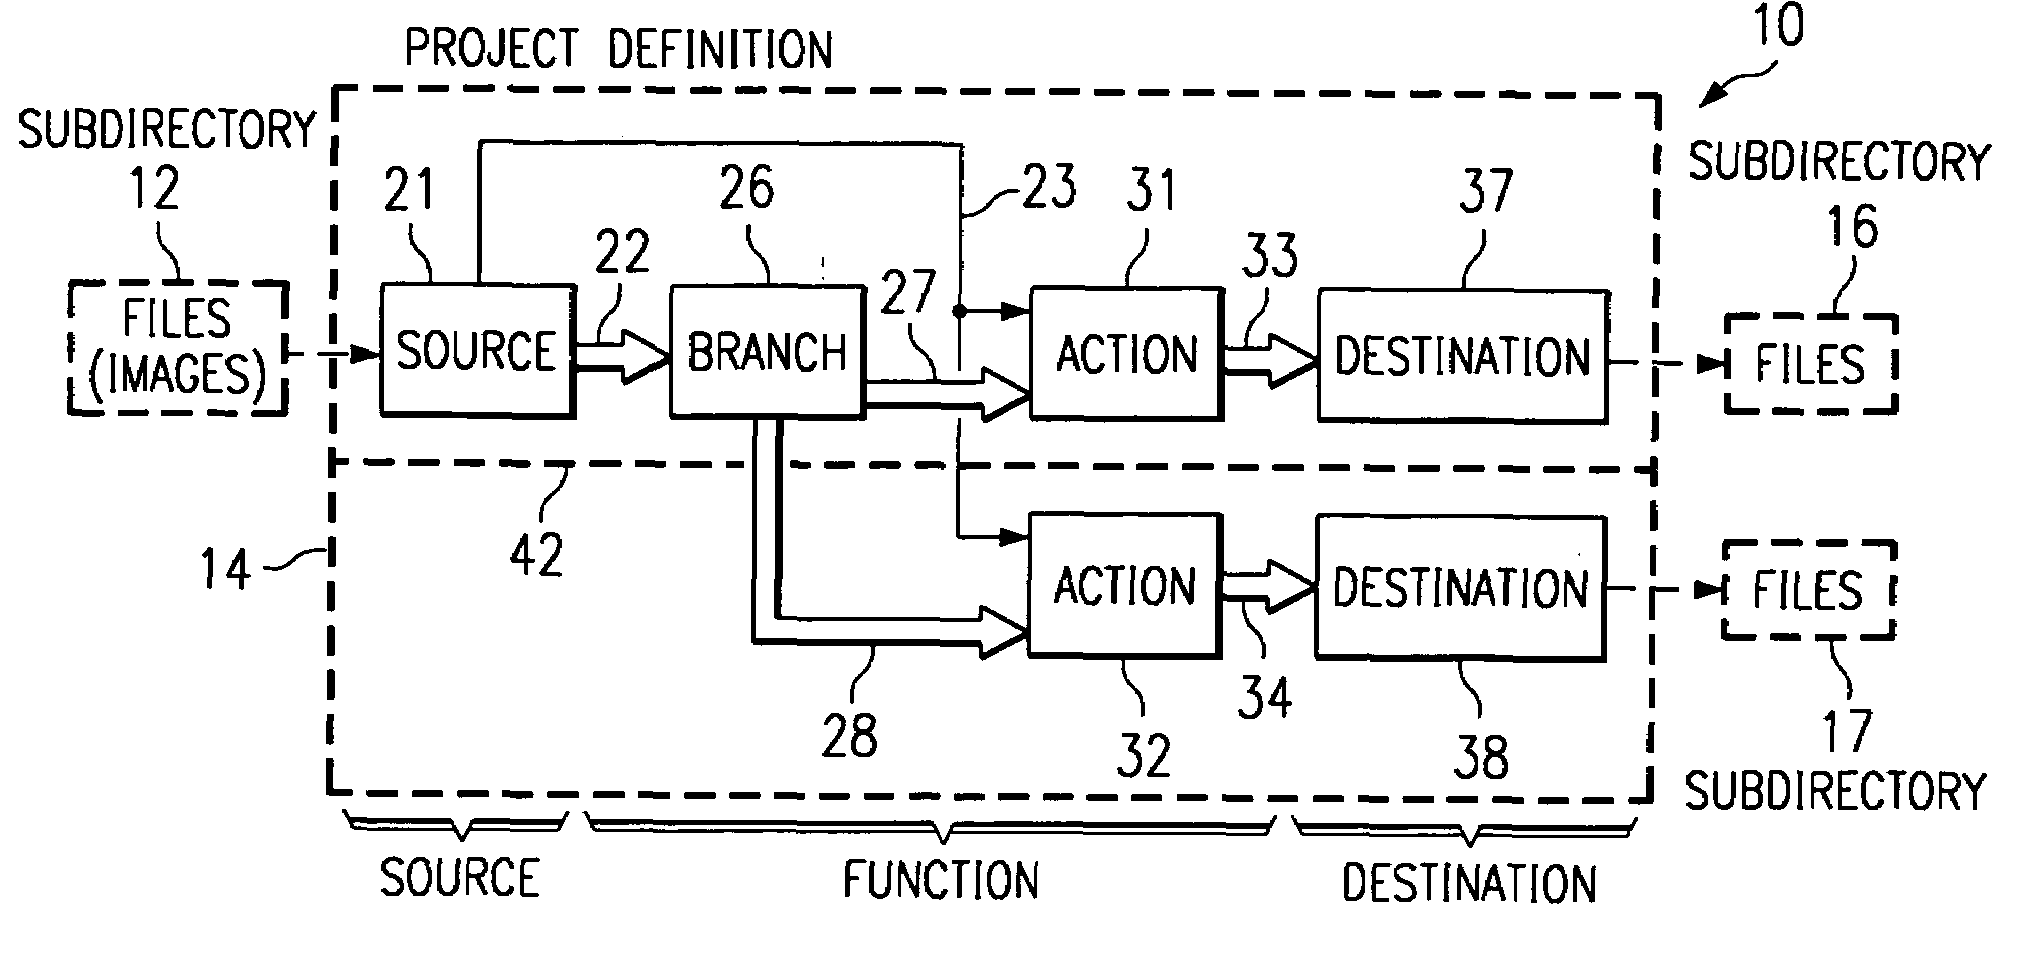 Method and apparatus for preparing a definition to control automated data processing